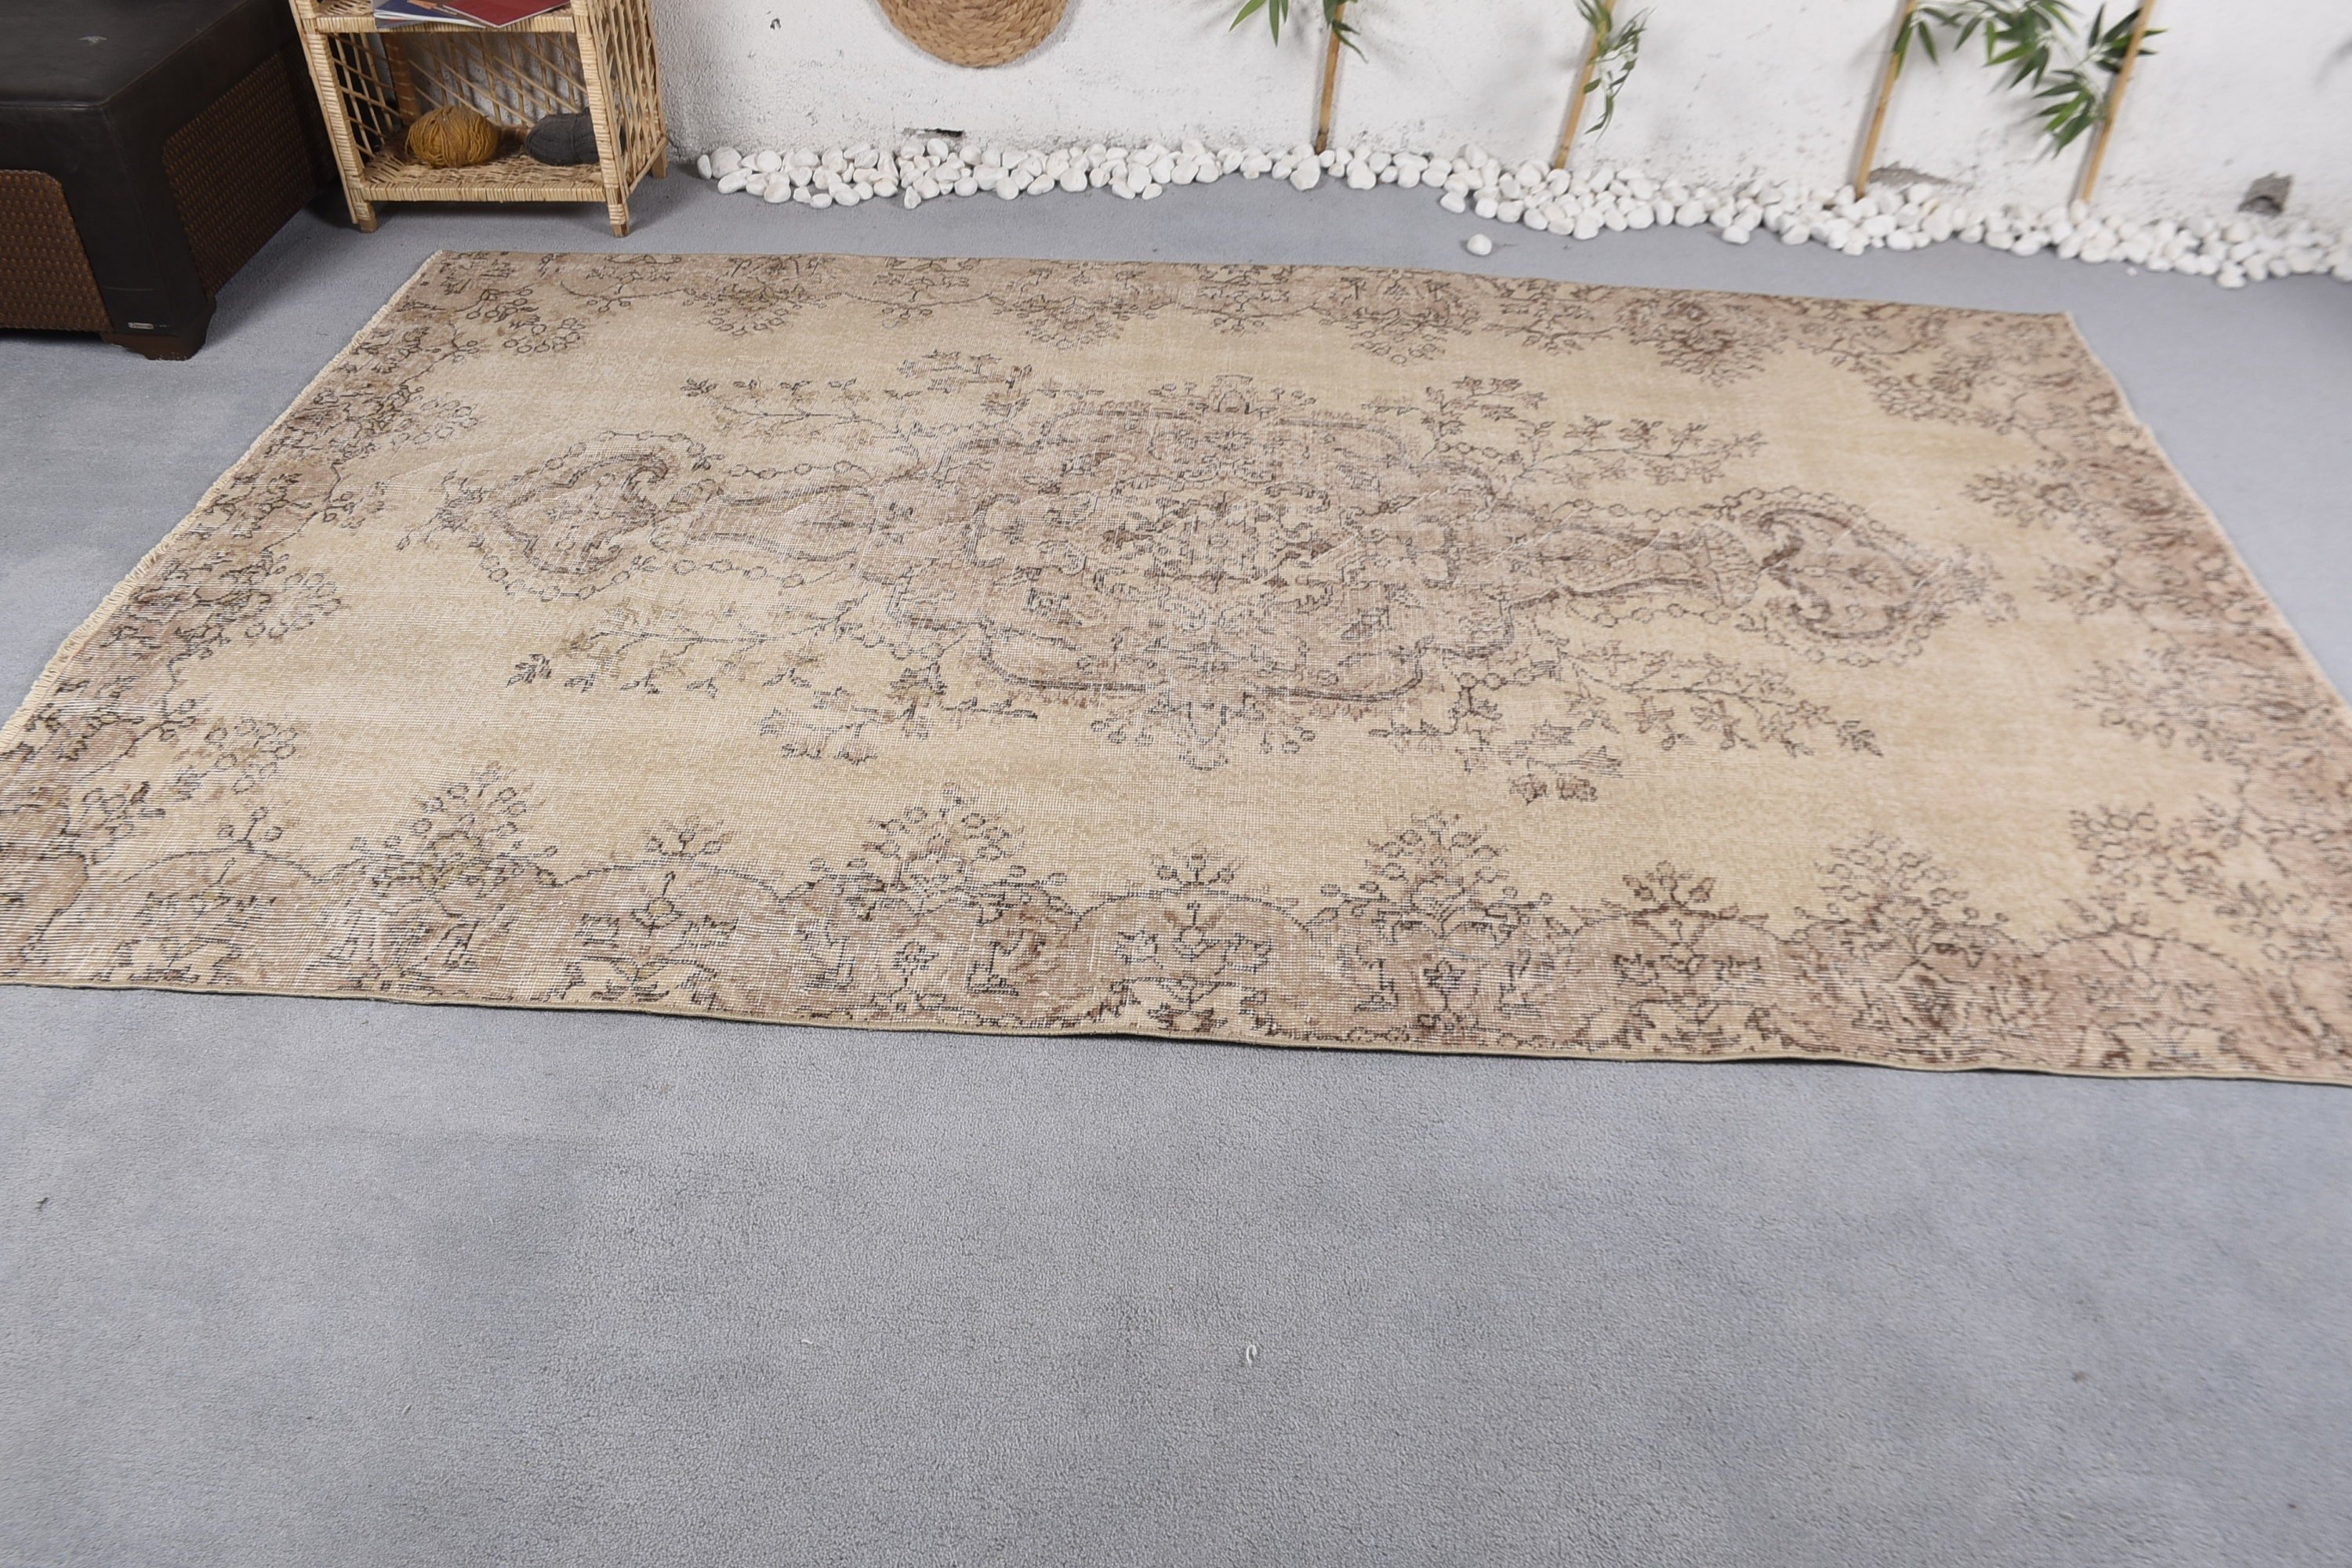 Beige Home Decor Rugs, Dining Room Rug, Salon Rugs, 5.7x9 ft Large Rug, Abstract Rug, Antique Rug, Oushak Rugs, Turkish Rugs, Vintage Rugs